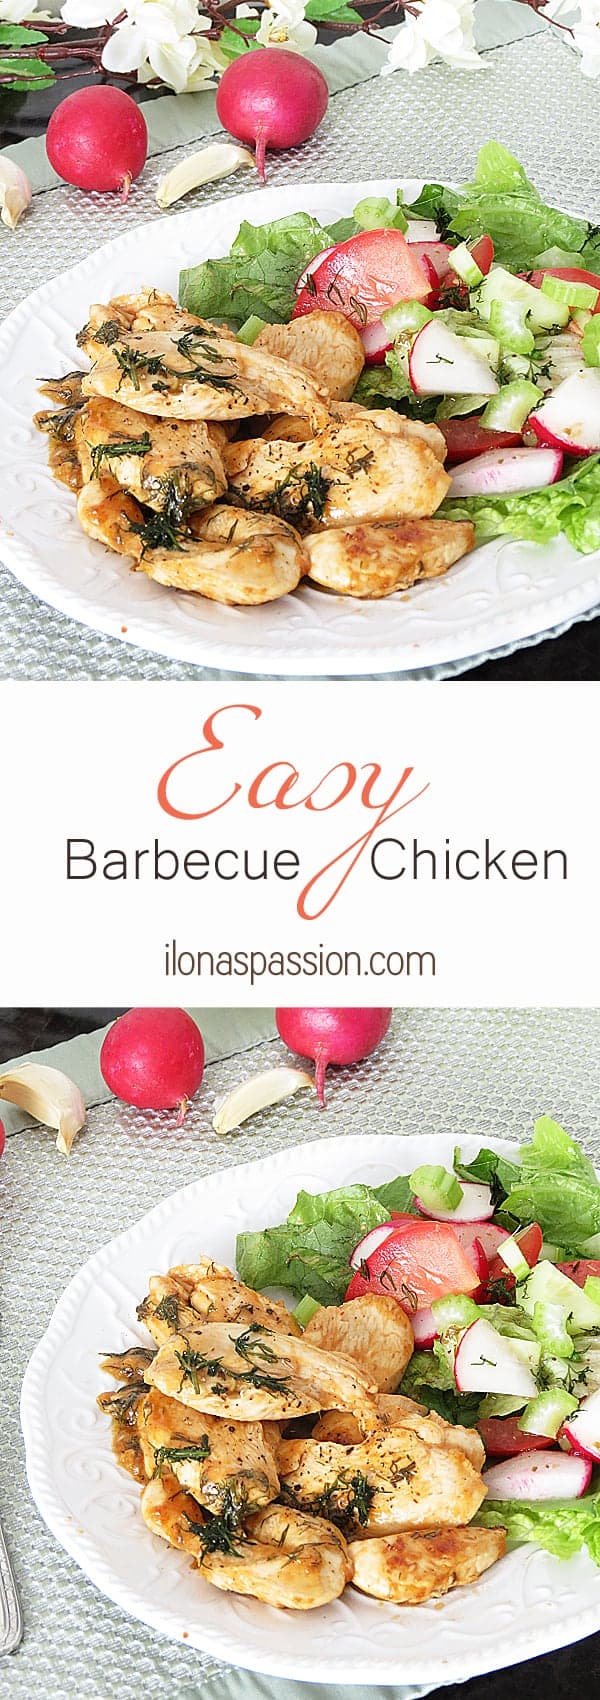 Easy Barbecue Chicken... ready in 30 minutes! by ilonaspassion.com